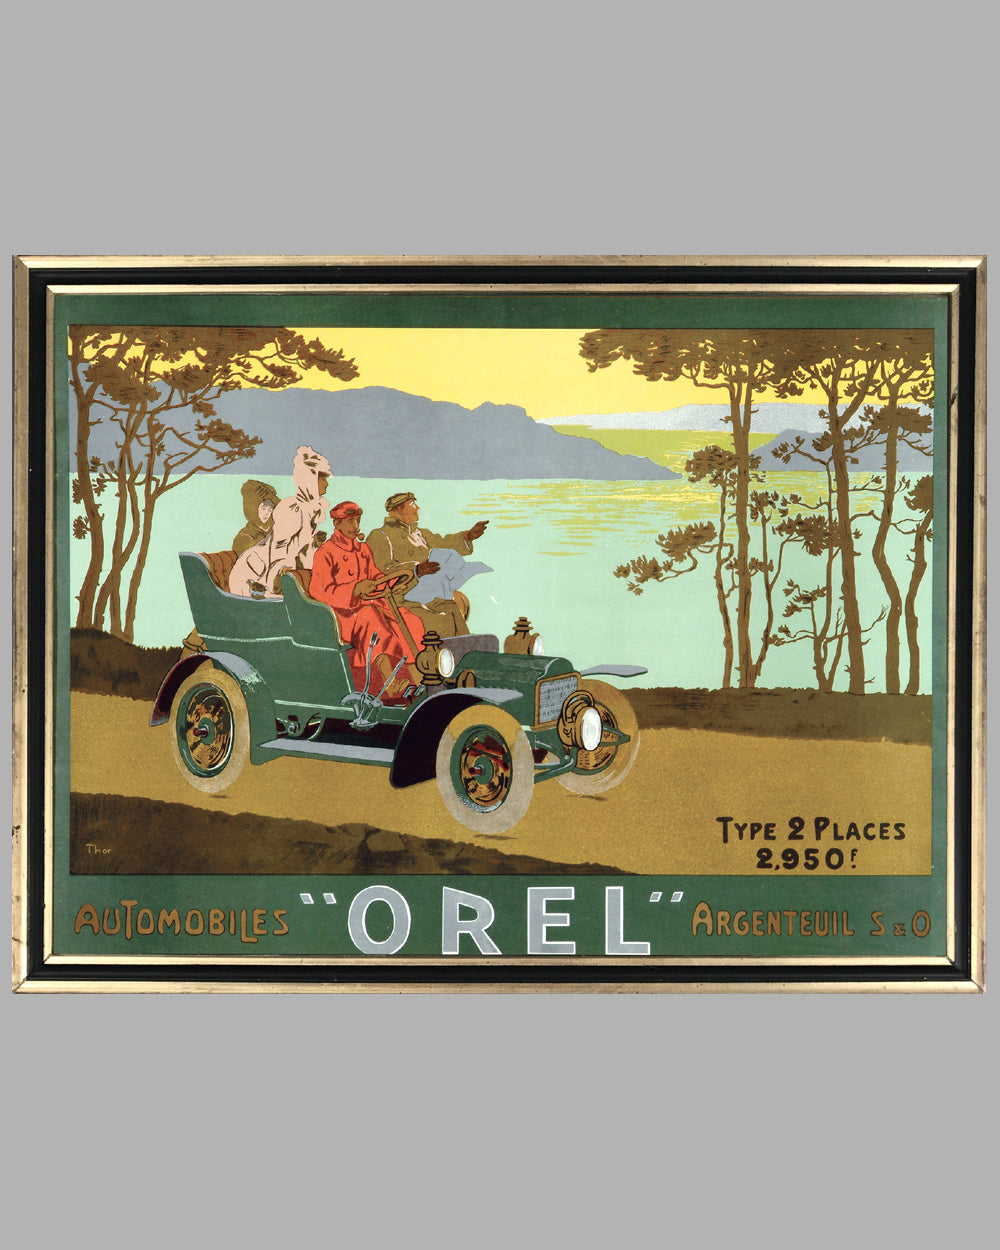 Automobiles Orel advertising poster, by Thor